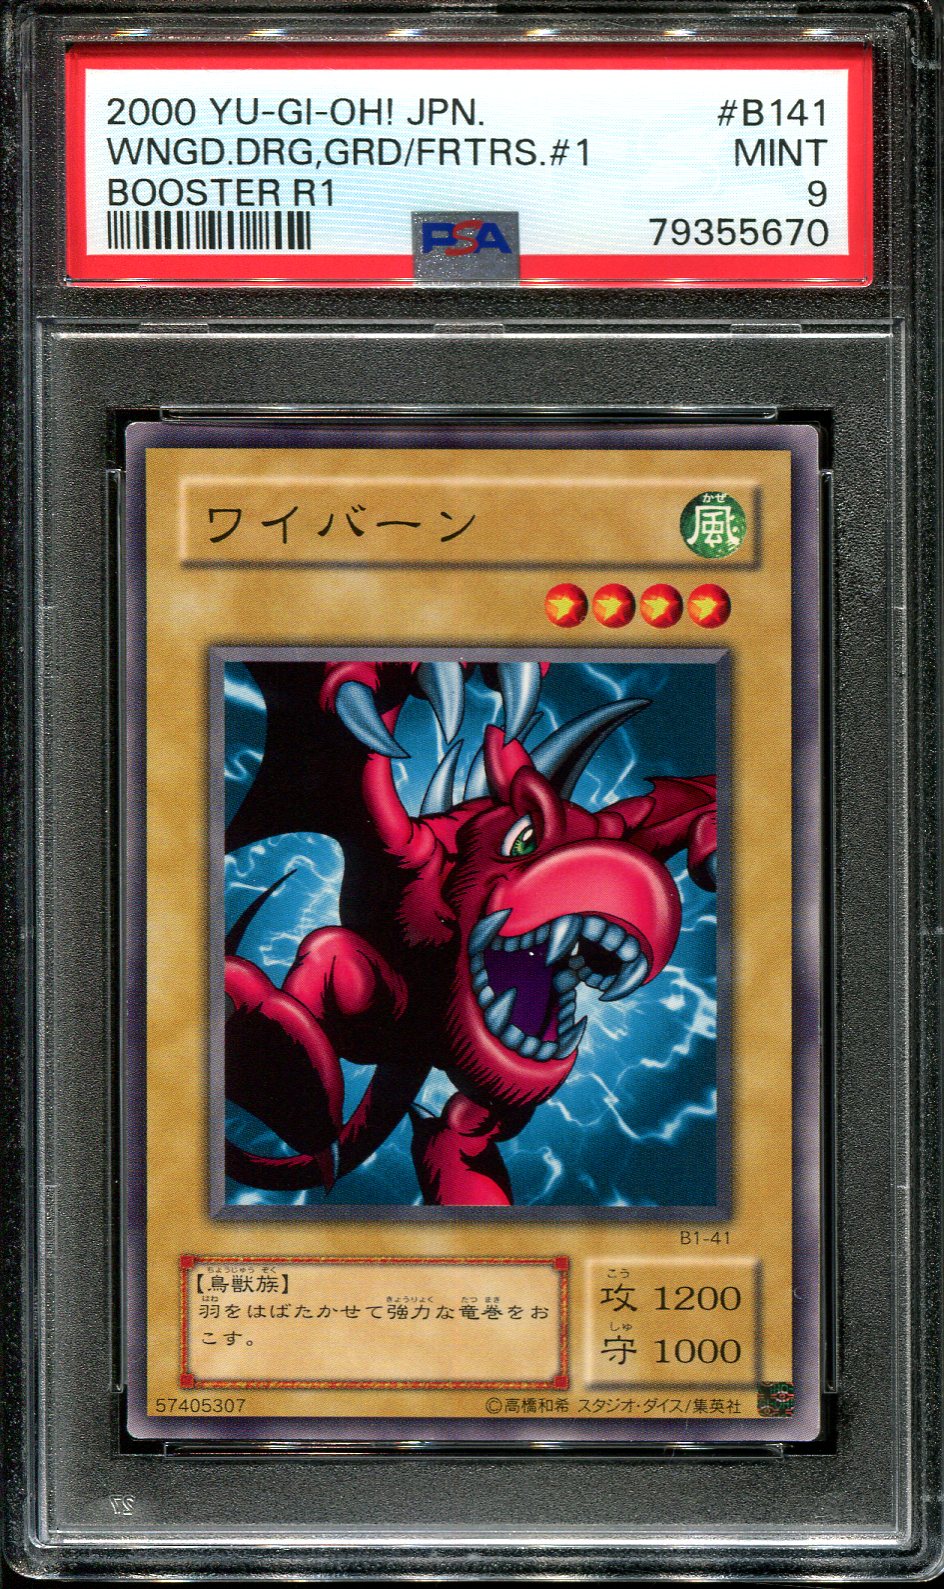 YUGIOH - PSA 9 - WINGED DRAGON GUARDIAN OF THE FORTRESS #1 - B1-41 - BOOSTER R1 - JAPANESE OCG